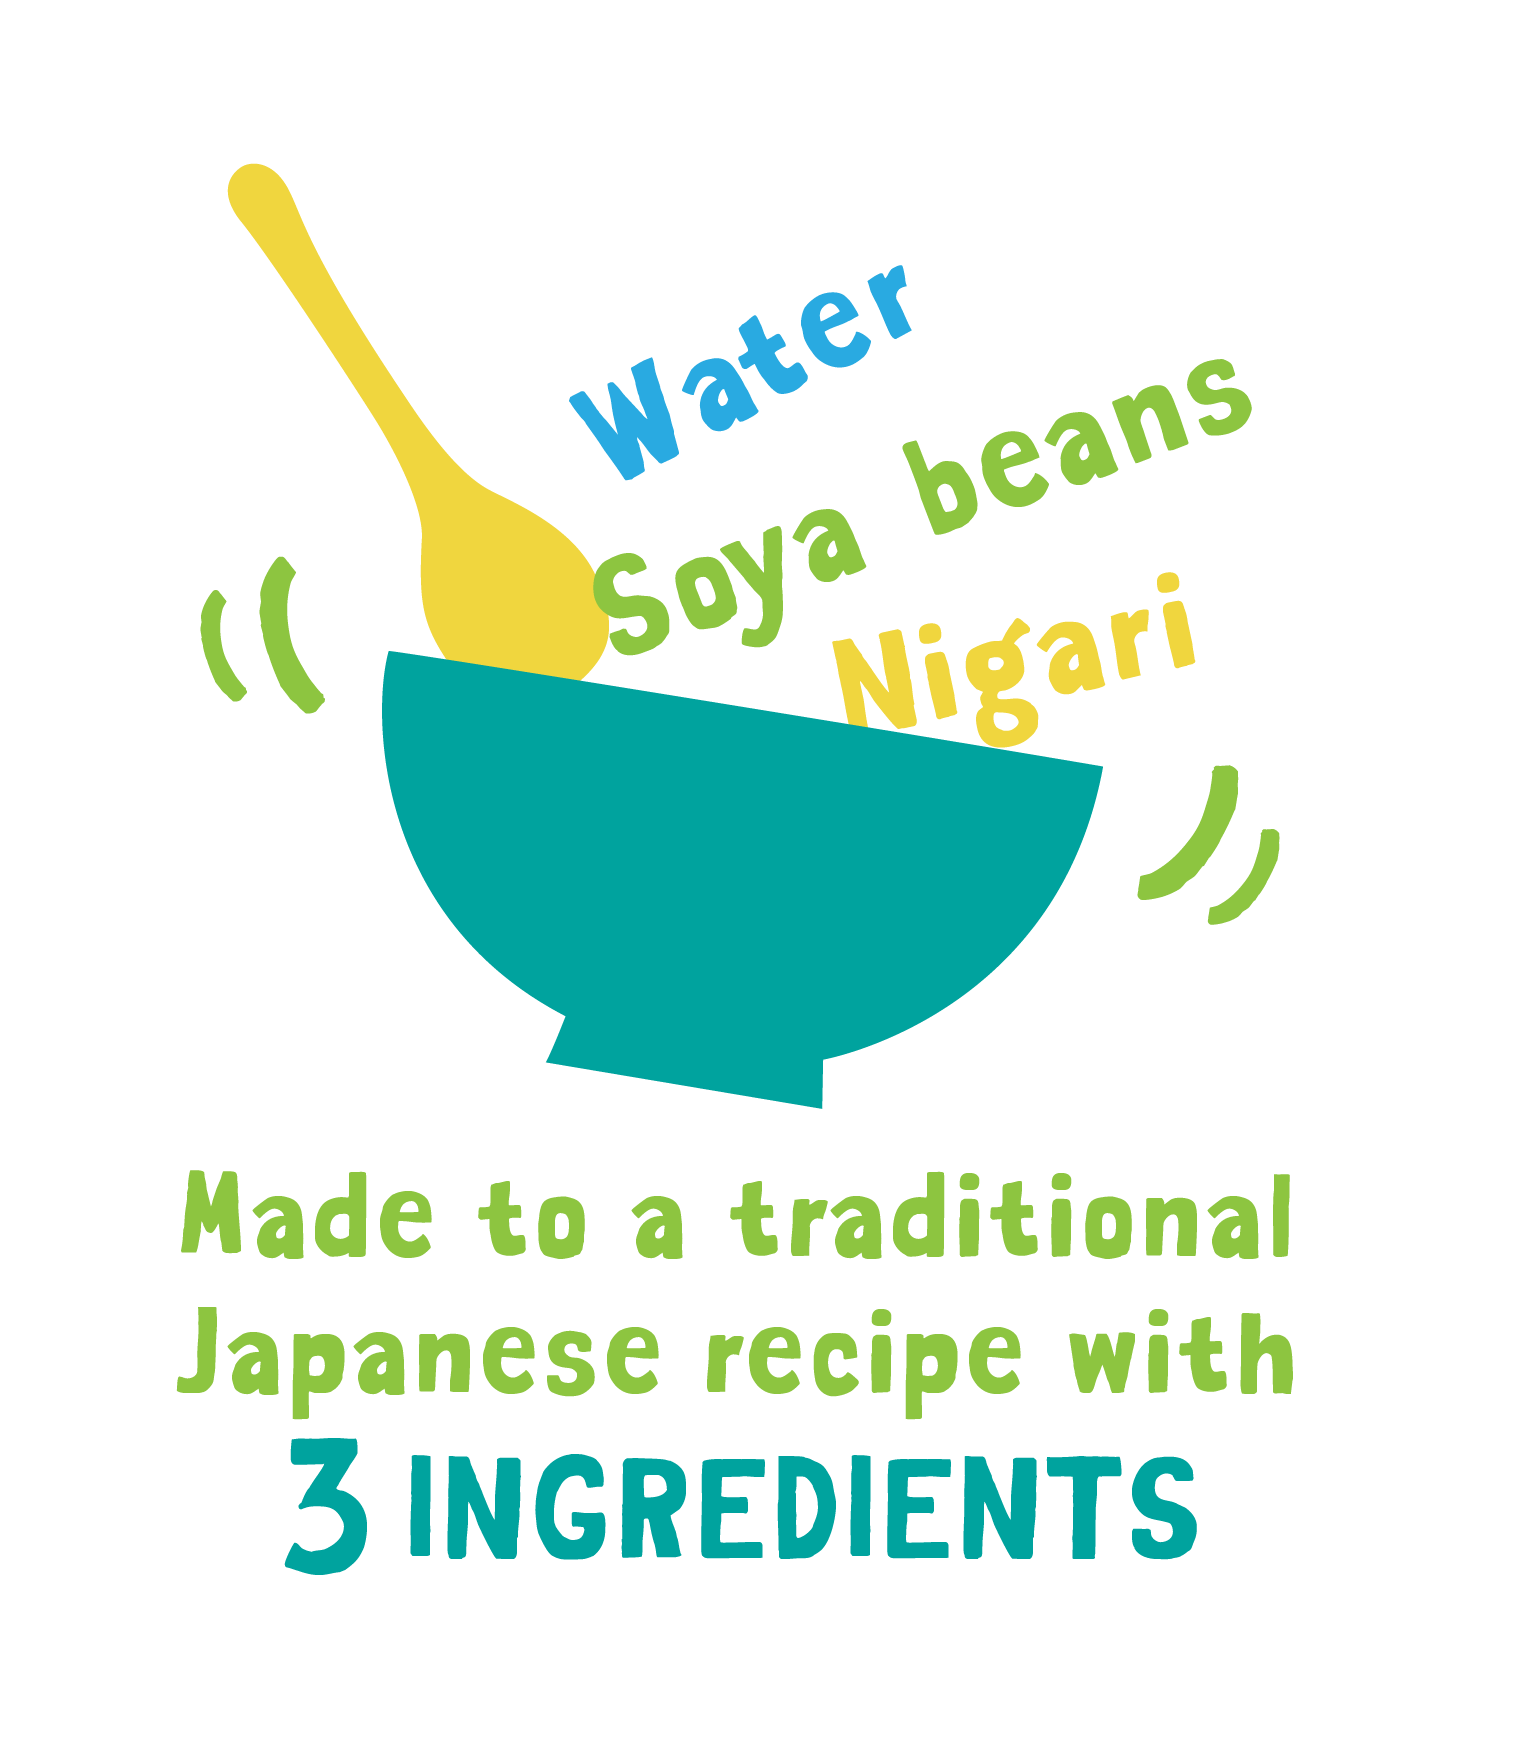 Our tofu is made with 3 ingredients